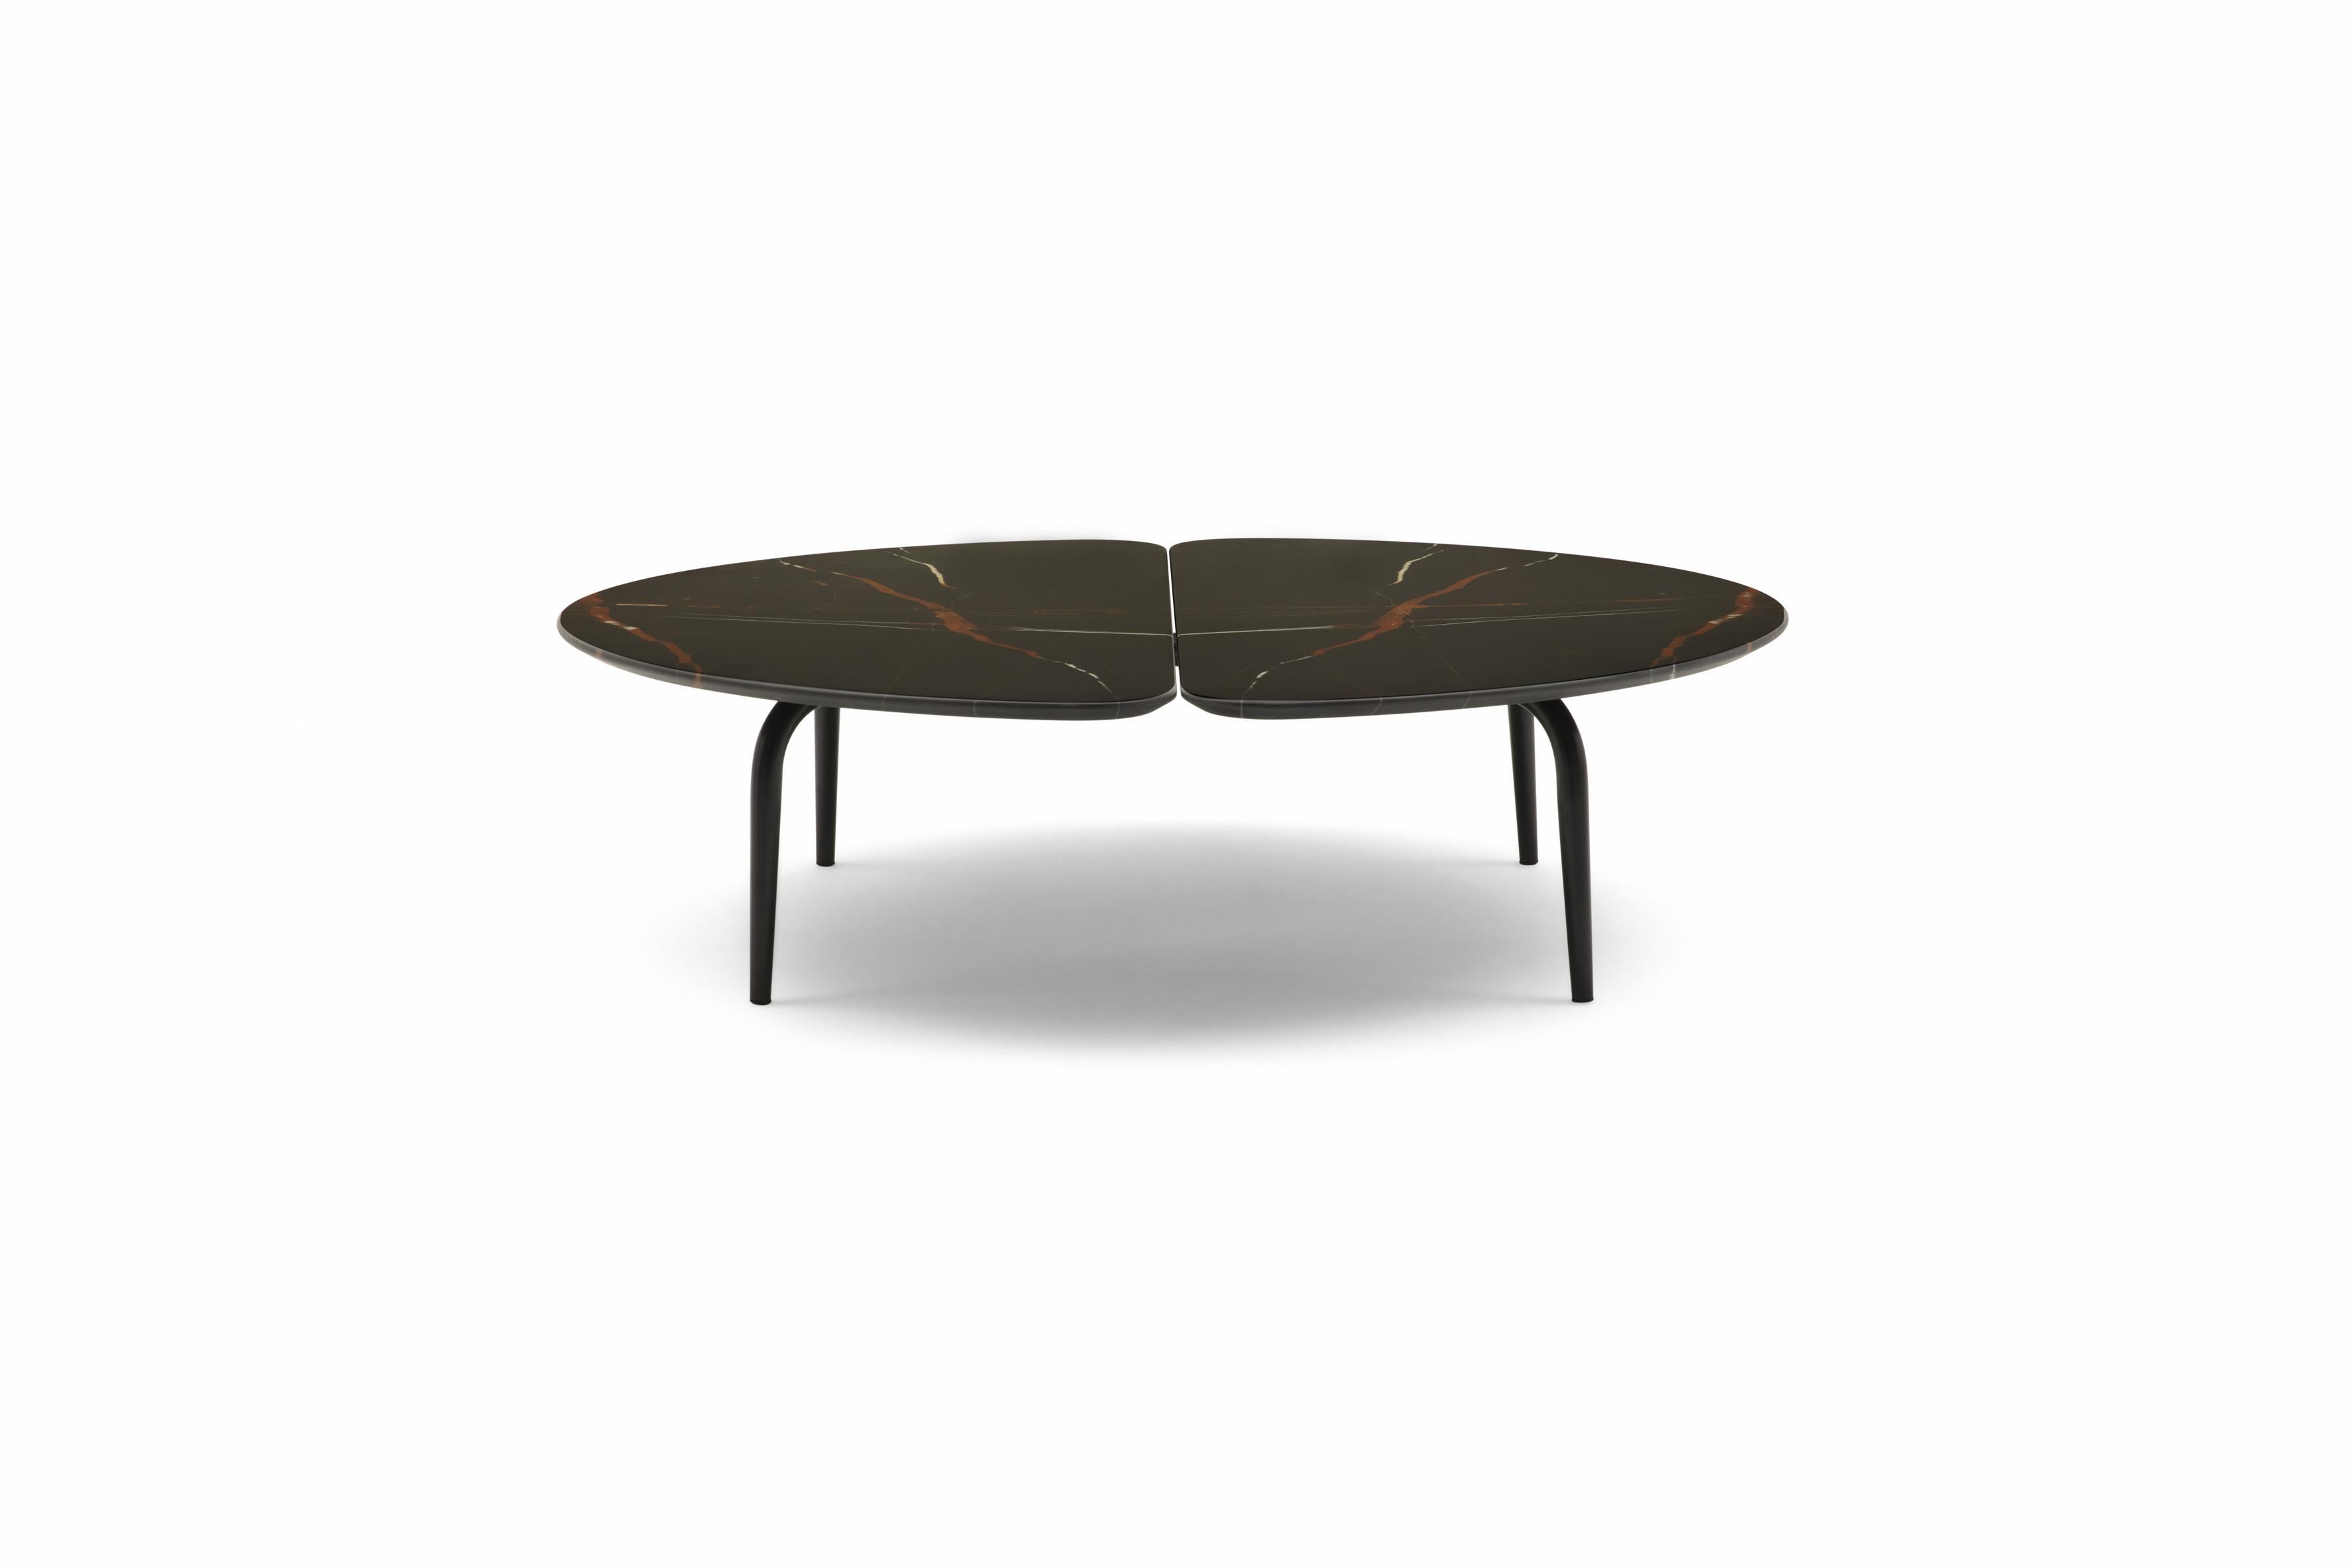 Zanotta Graphium Small Table in Sahara Noir Marble Top with Black Steel Frame by Garcia Cumini

Black varnished steel frame. Tops available either in grey Calacatta marble, in red Lepanto marble or in Sahara Noir marble with stain-resistant